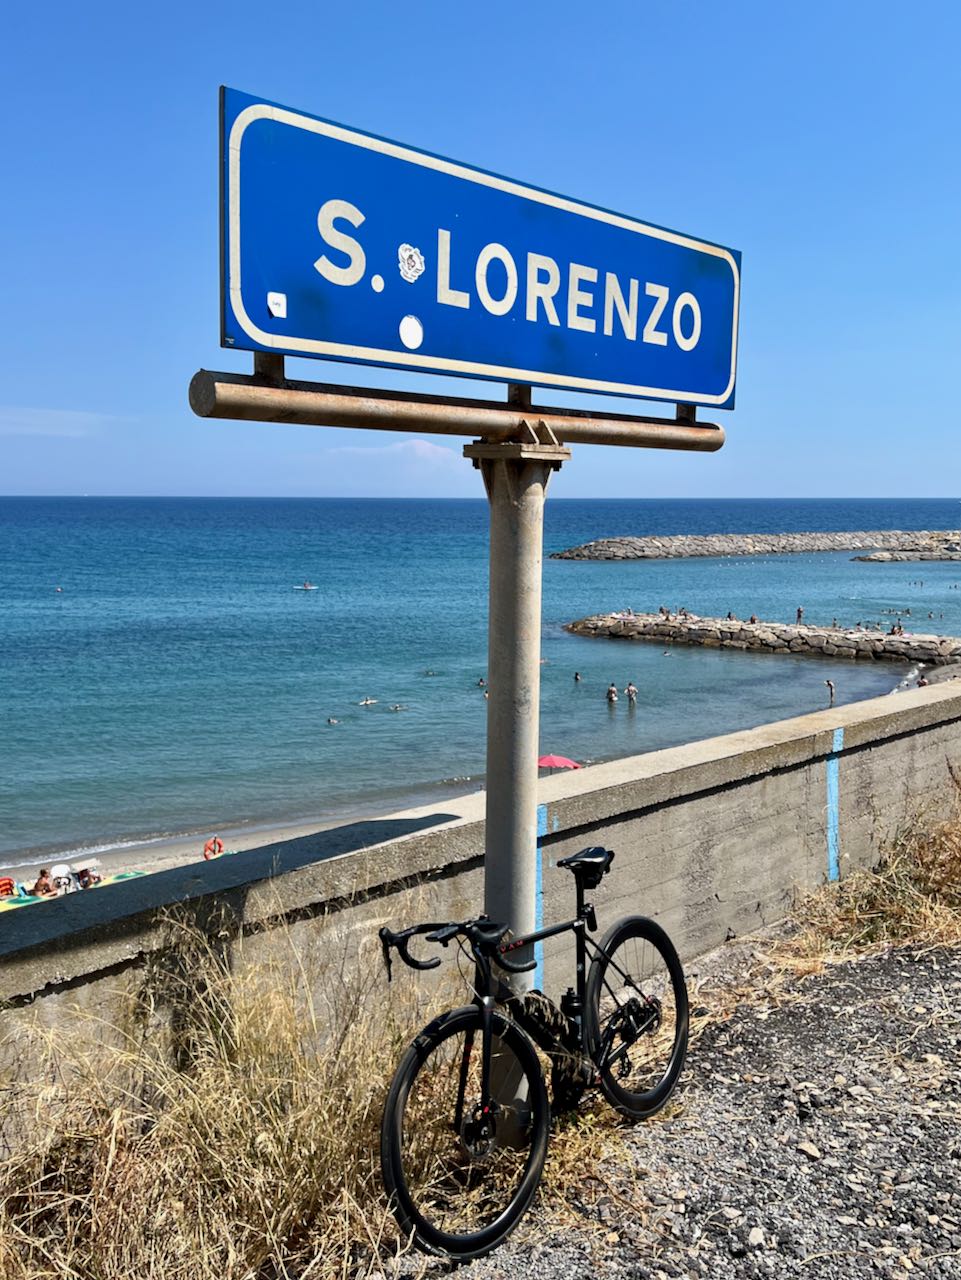 Bicycle leaning against San Lorenzo city sign with ocean and swimmers in the background